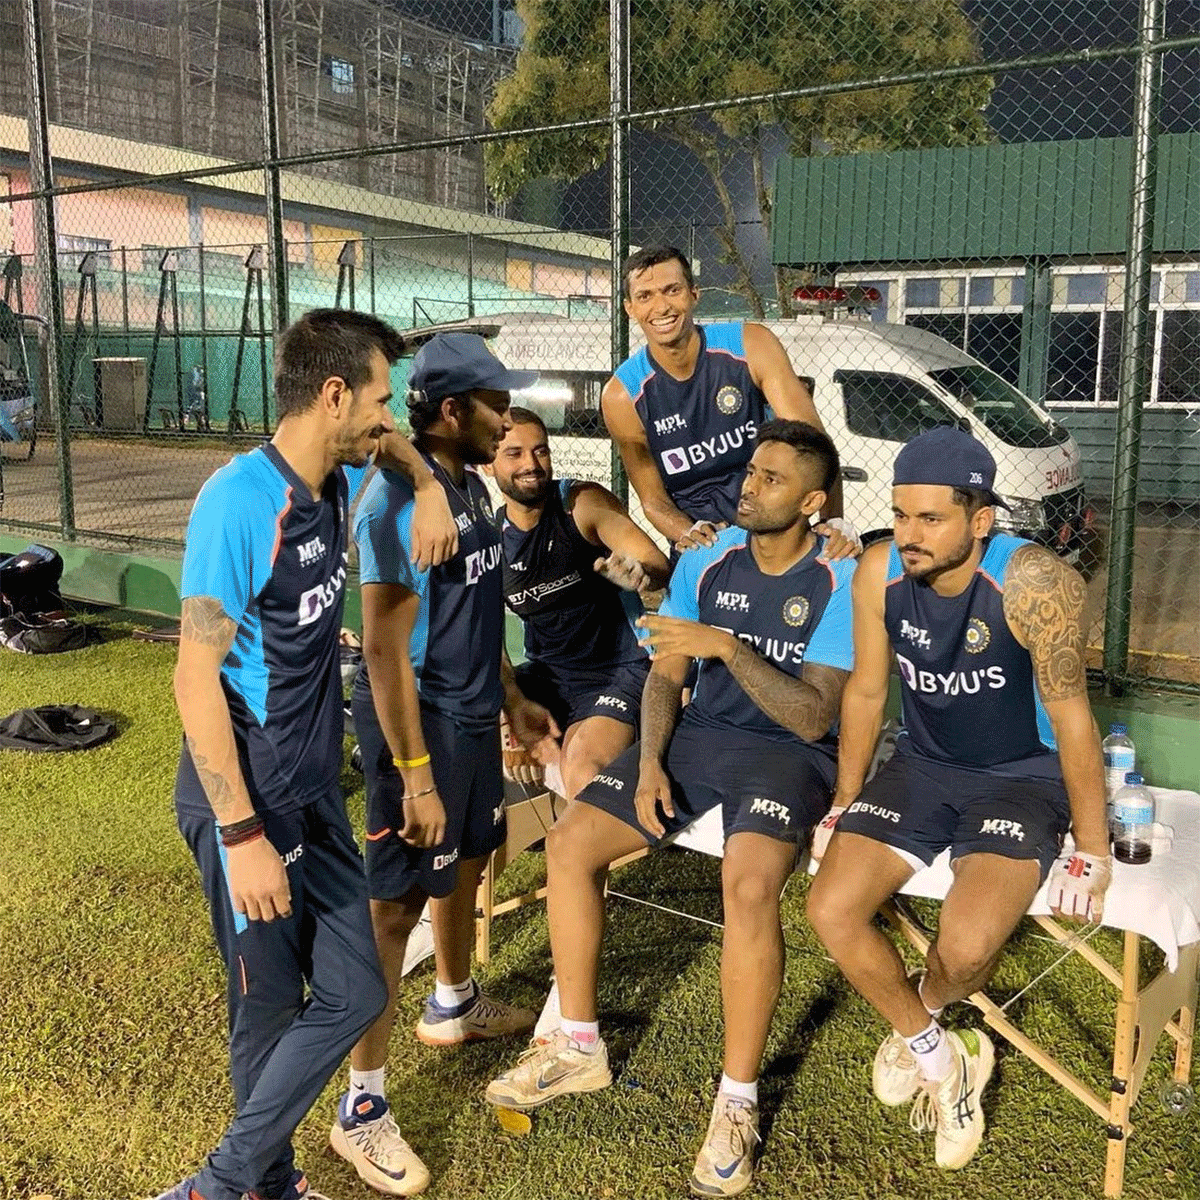 Members of the Indian team relaxing on Friday 